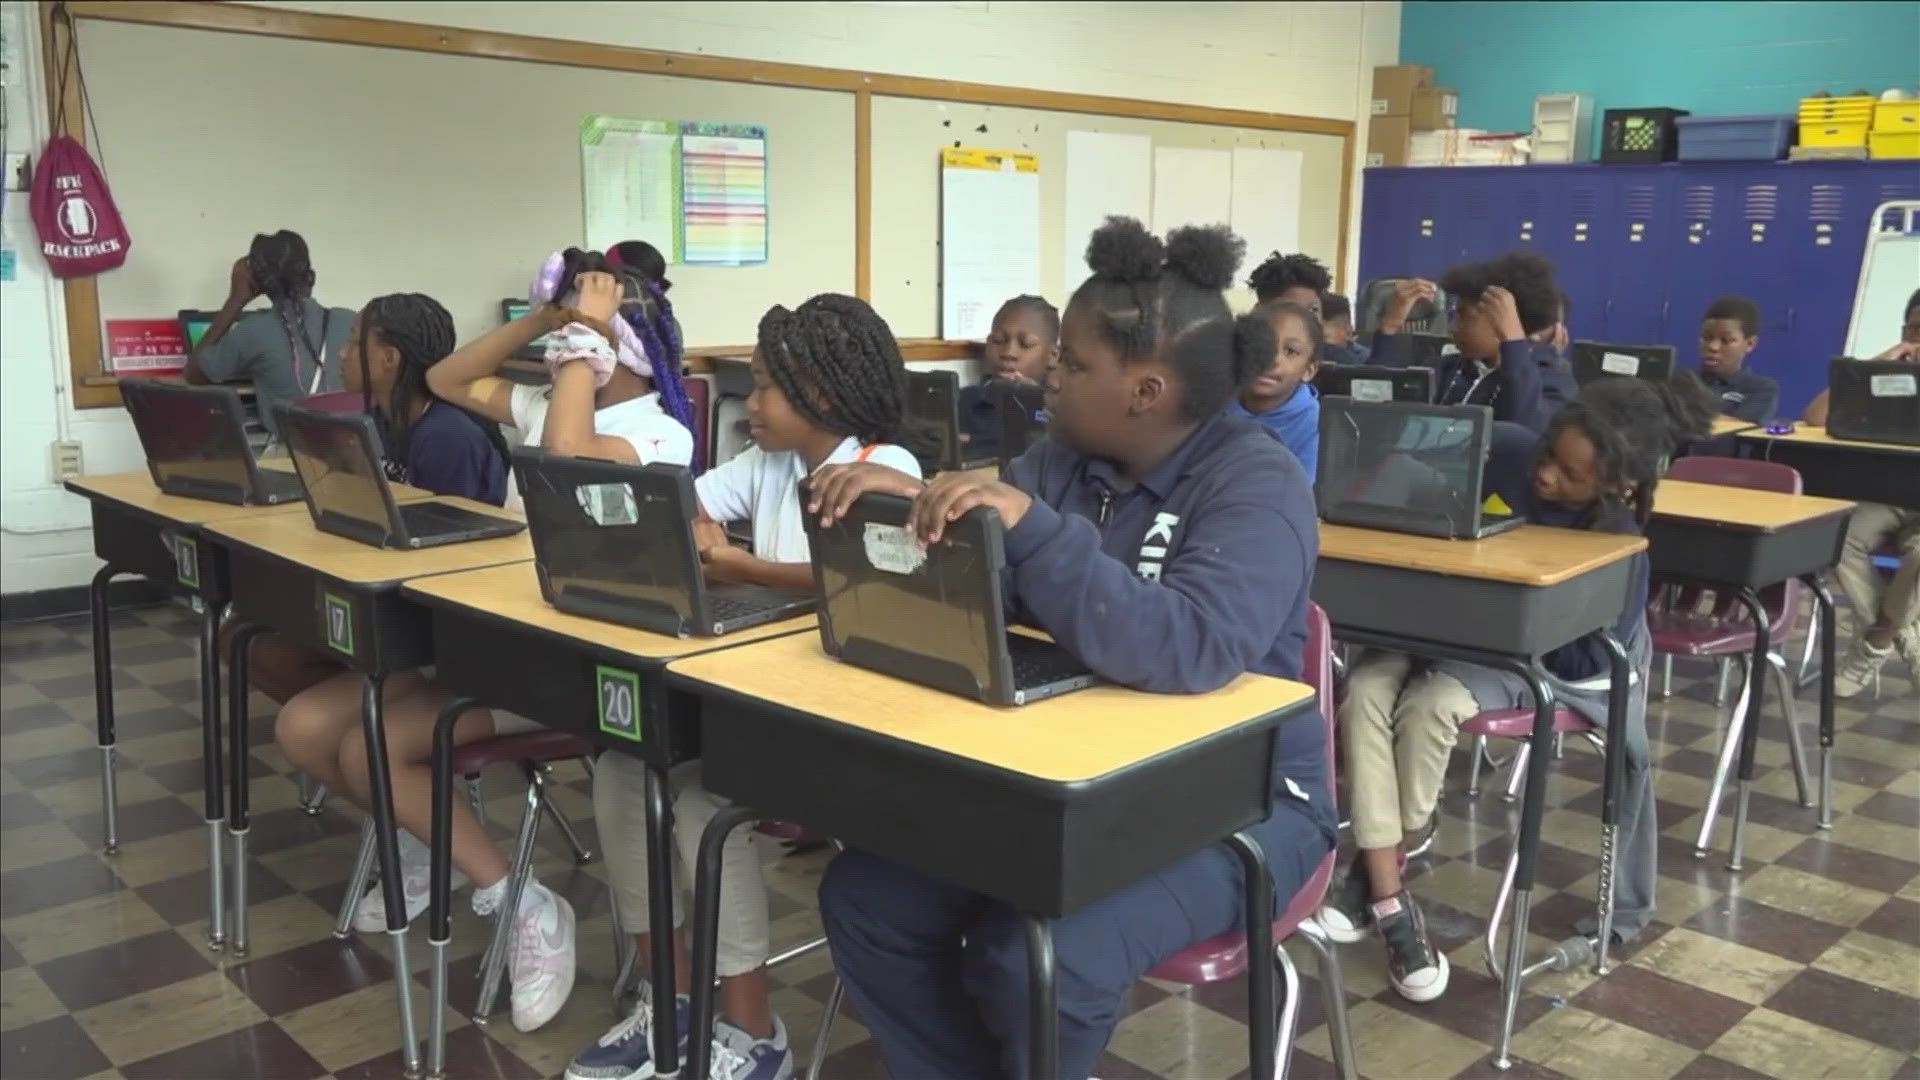 Rather than disciplining students when there is a conflict in school, KIPP Memphis Public Schools are turning to a conflict resolution approach.